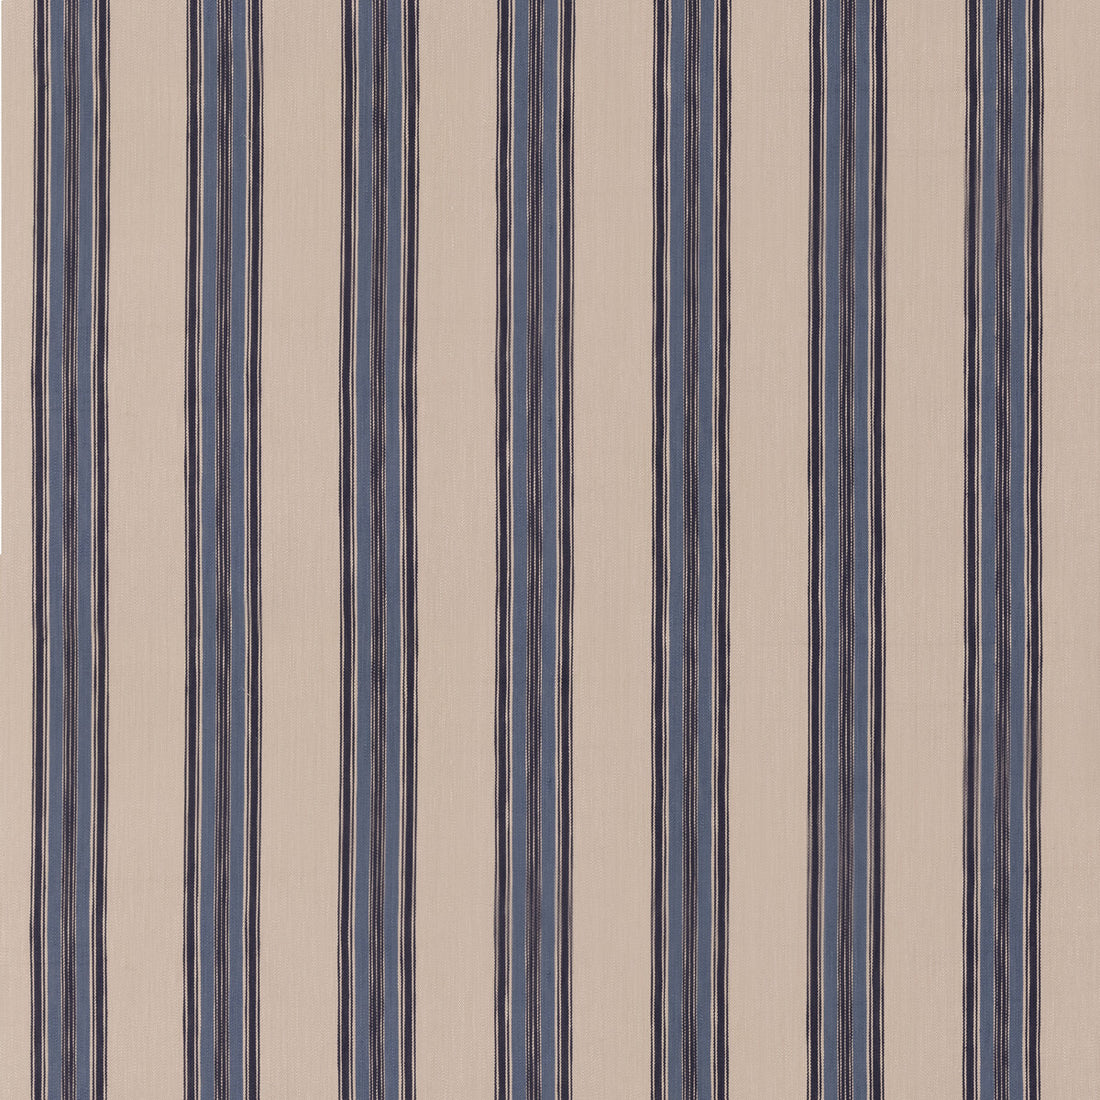 Falmouth Stripe fabric in indigo color - pattern FD829.H10.0 - by Mulberry in the Westerly Stripes collection